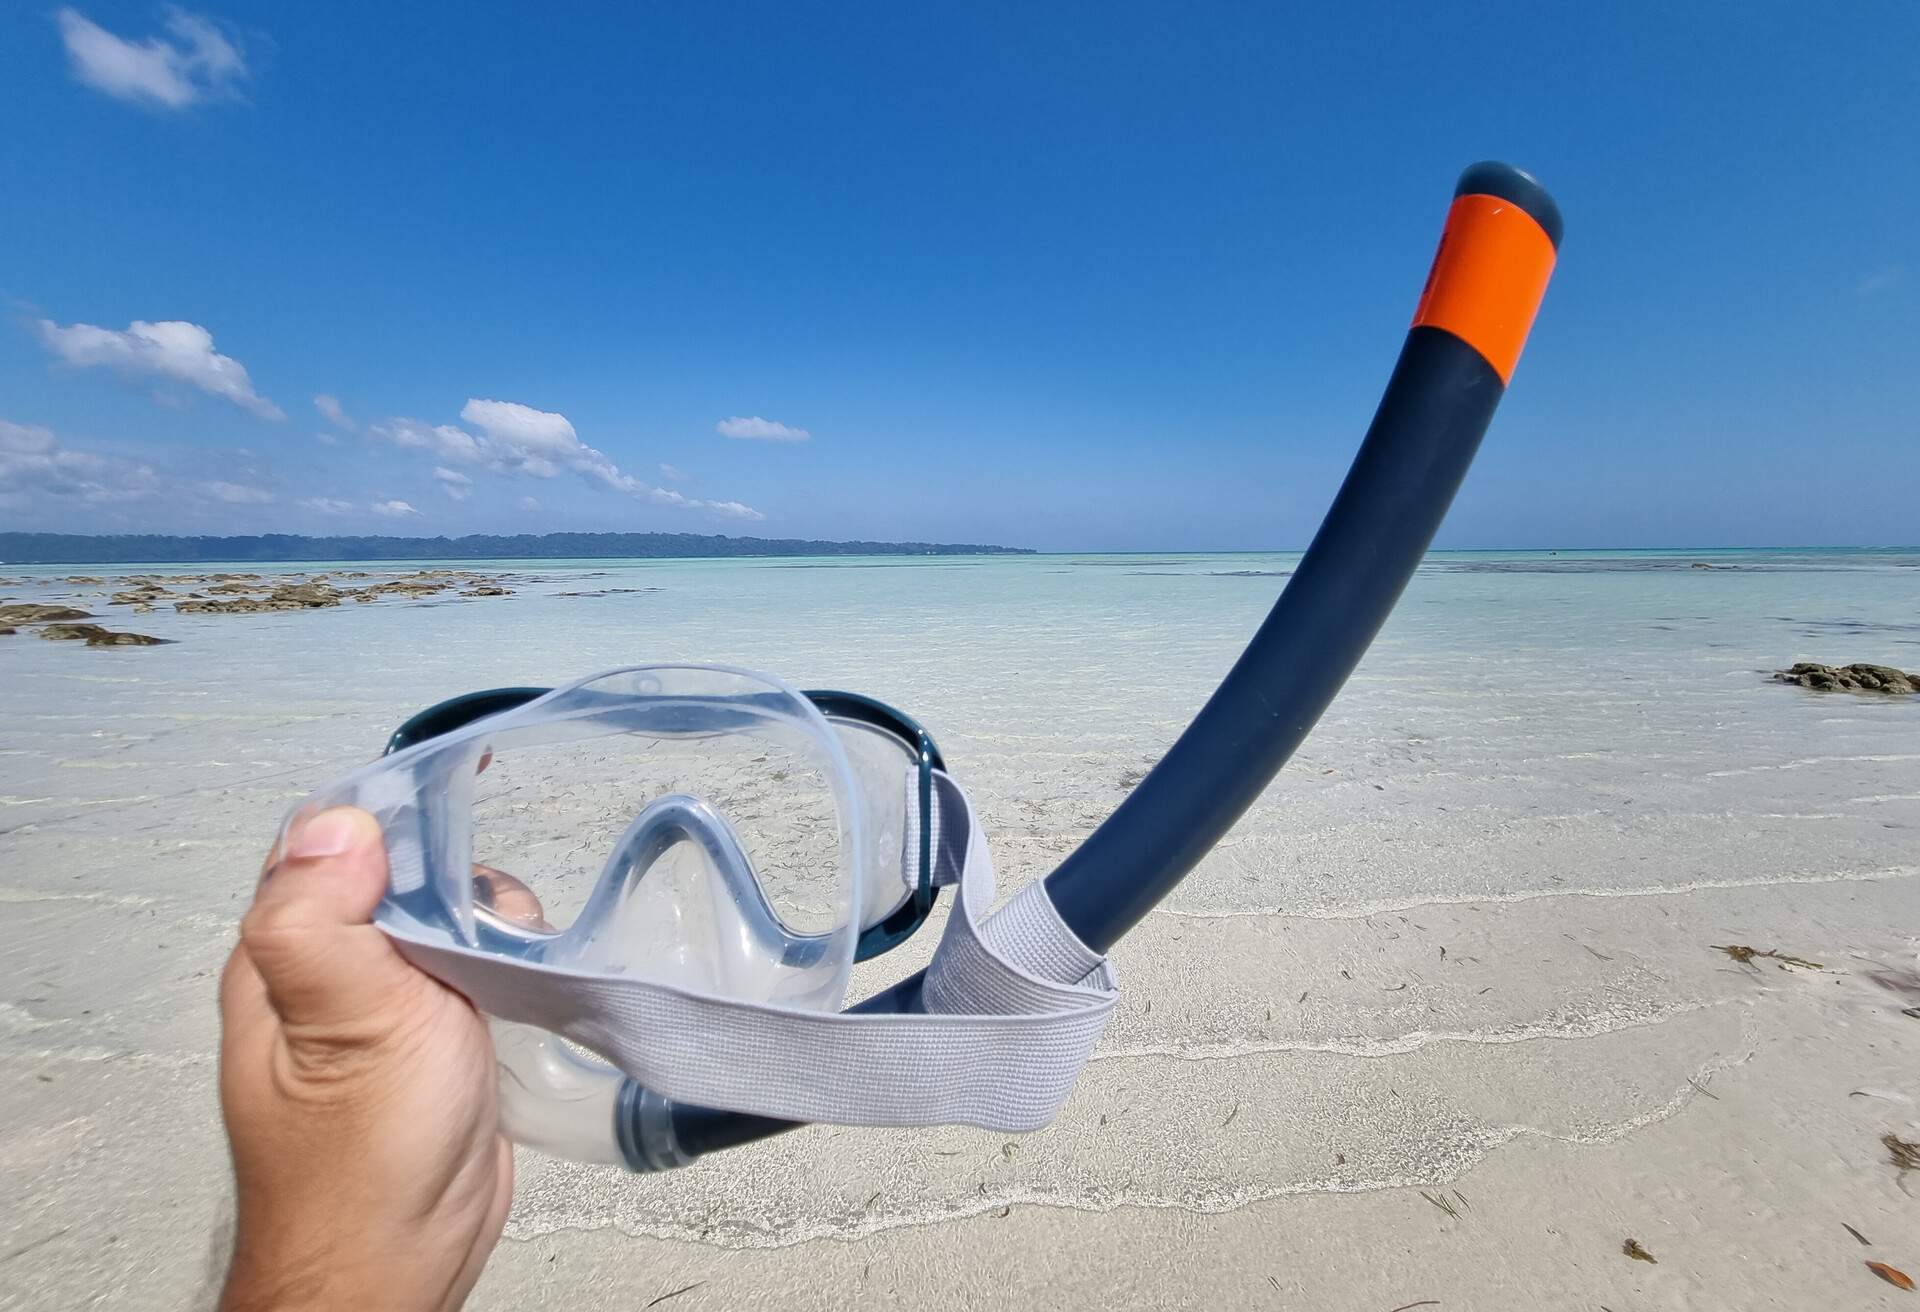 Panning shot holding out a snorkeling mask and breathing tube while going from the beach to the blue green waters at kala pathar beach andaman nicobar island India